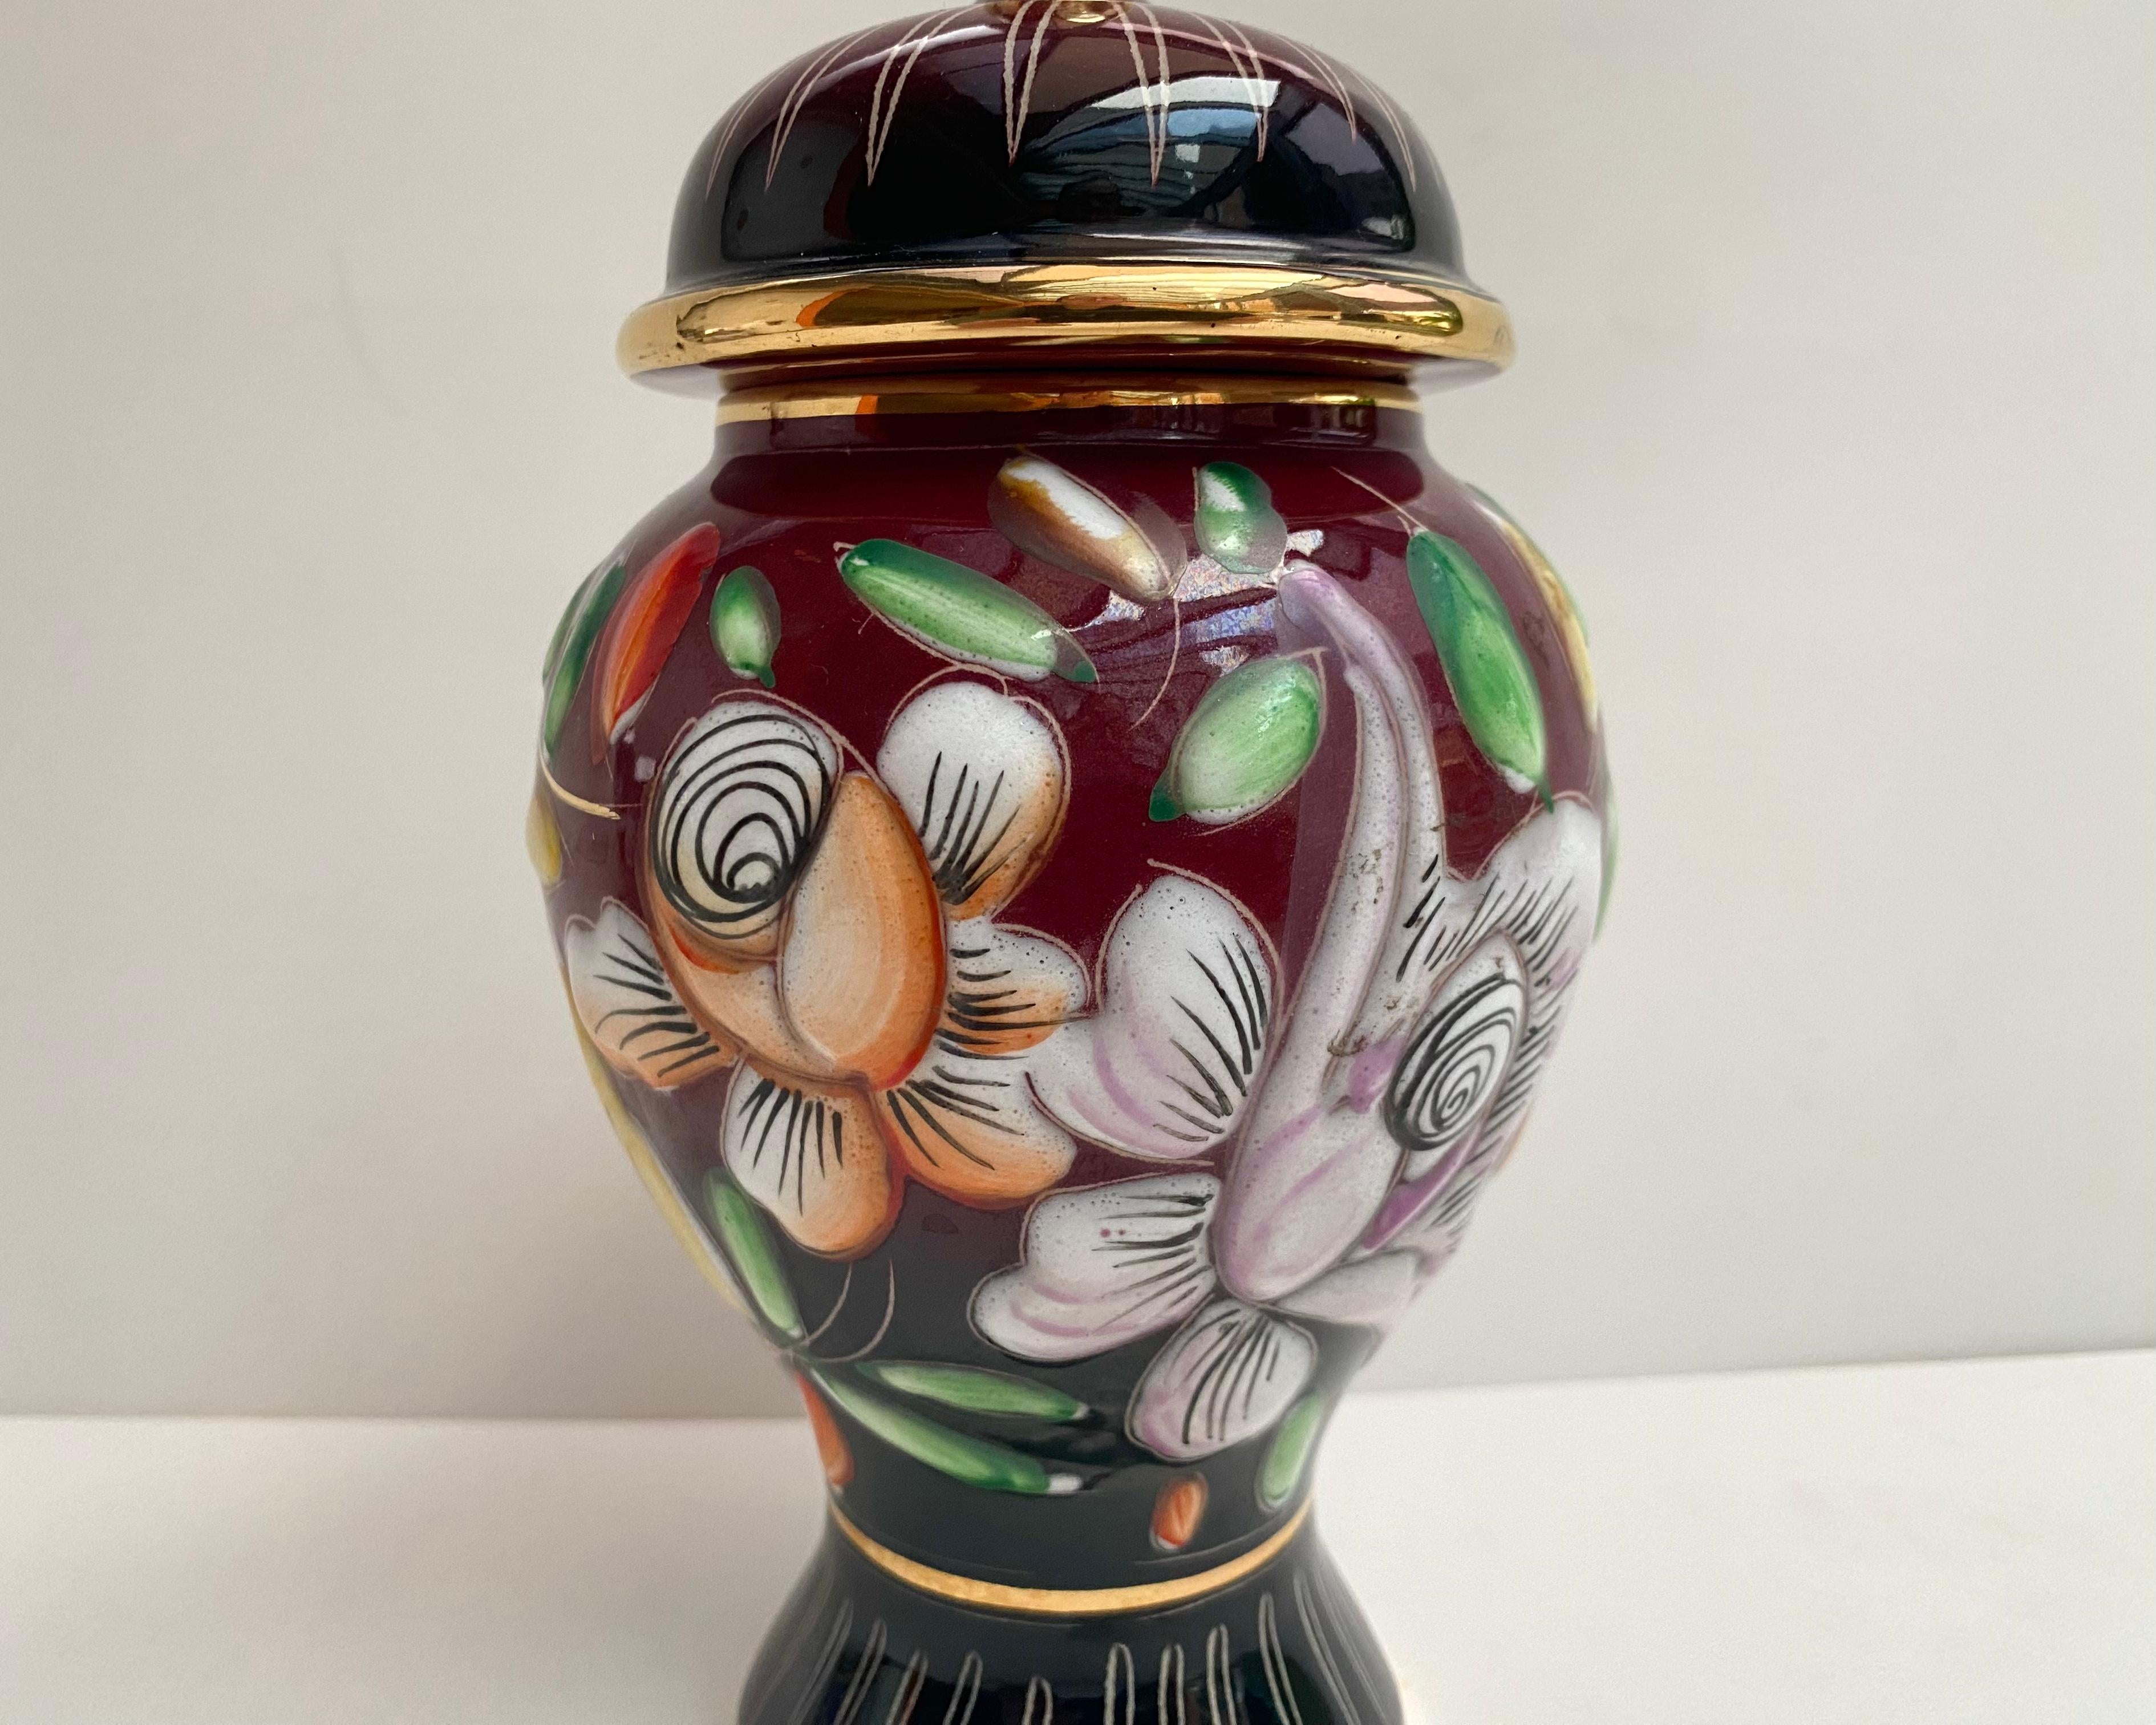 Rare Vintage Vase/Urn with lid from 1950s by Hubert Bequet made of precious ceramic with pure 24k gold processing.

From the 1950s. Manufactured in Belgium.

Entirely handmade by master craftsmen, it features floral decoration on a burgundy